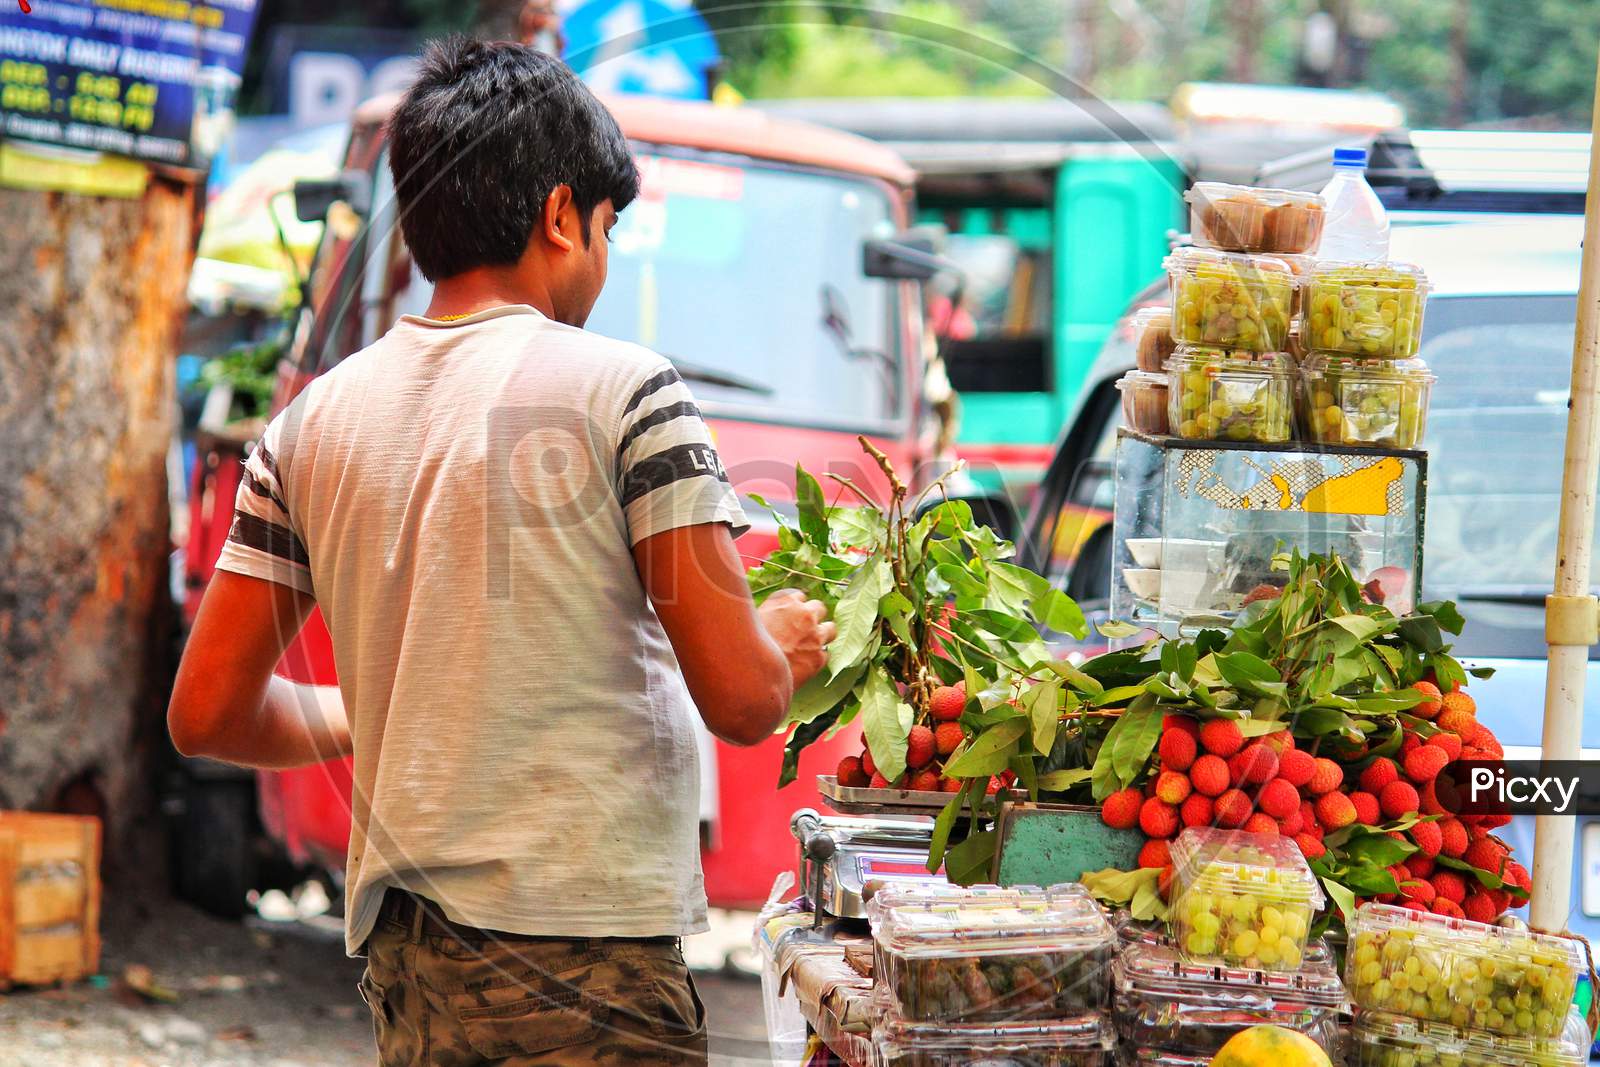 A Local Fruit Vendor Selling Fruits On Street .